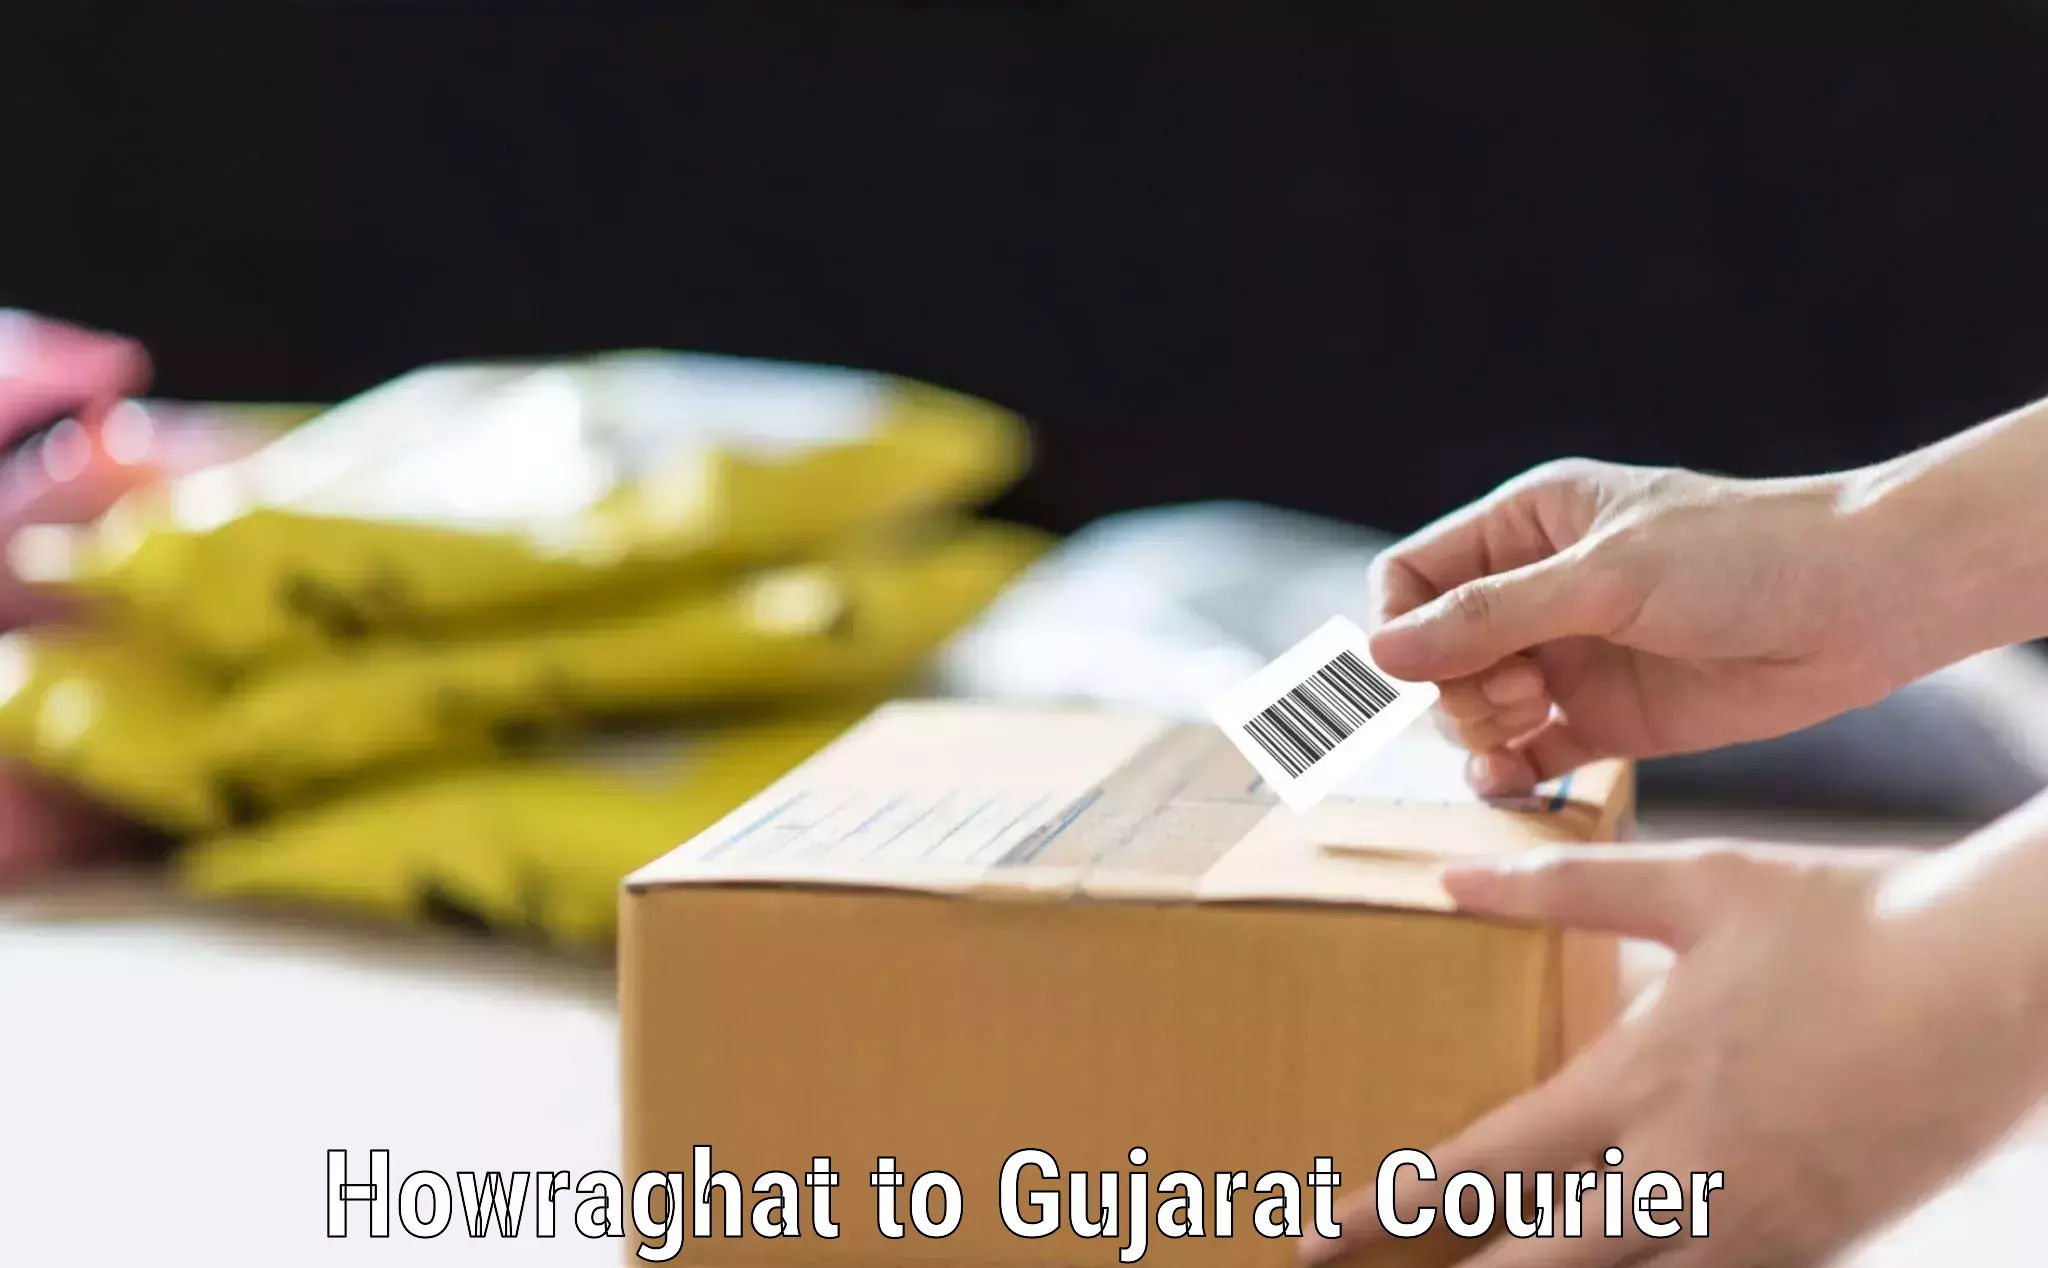 Baggage shipping logistics Howraghat to Gujarat